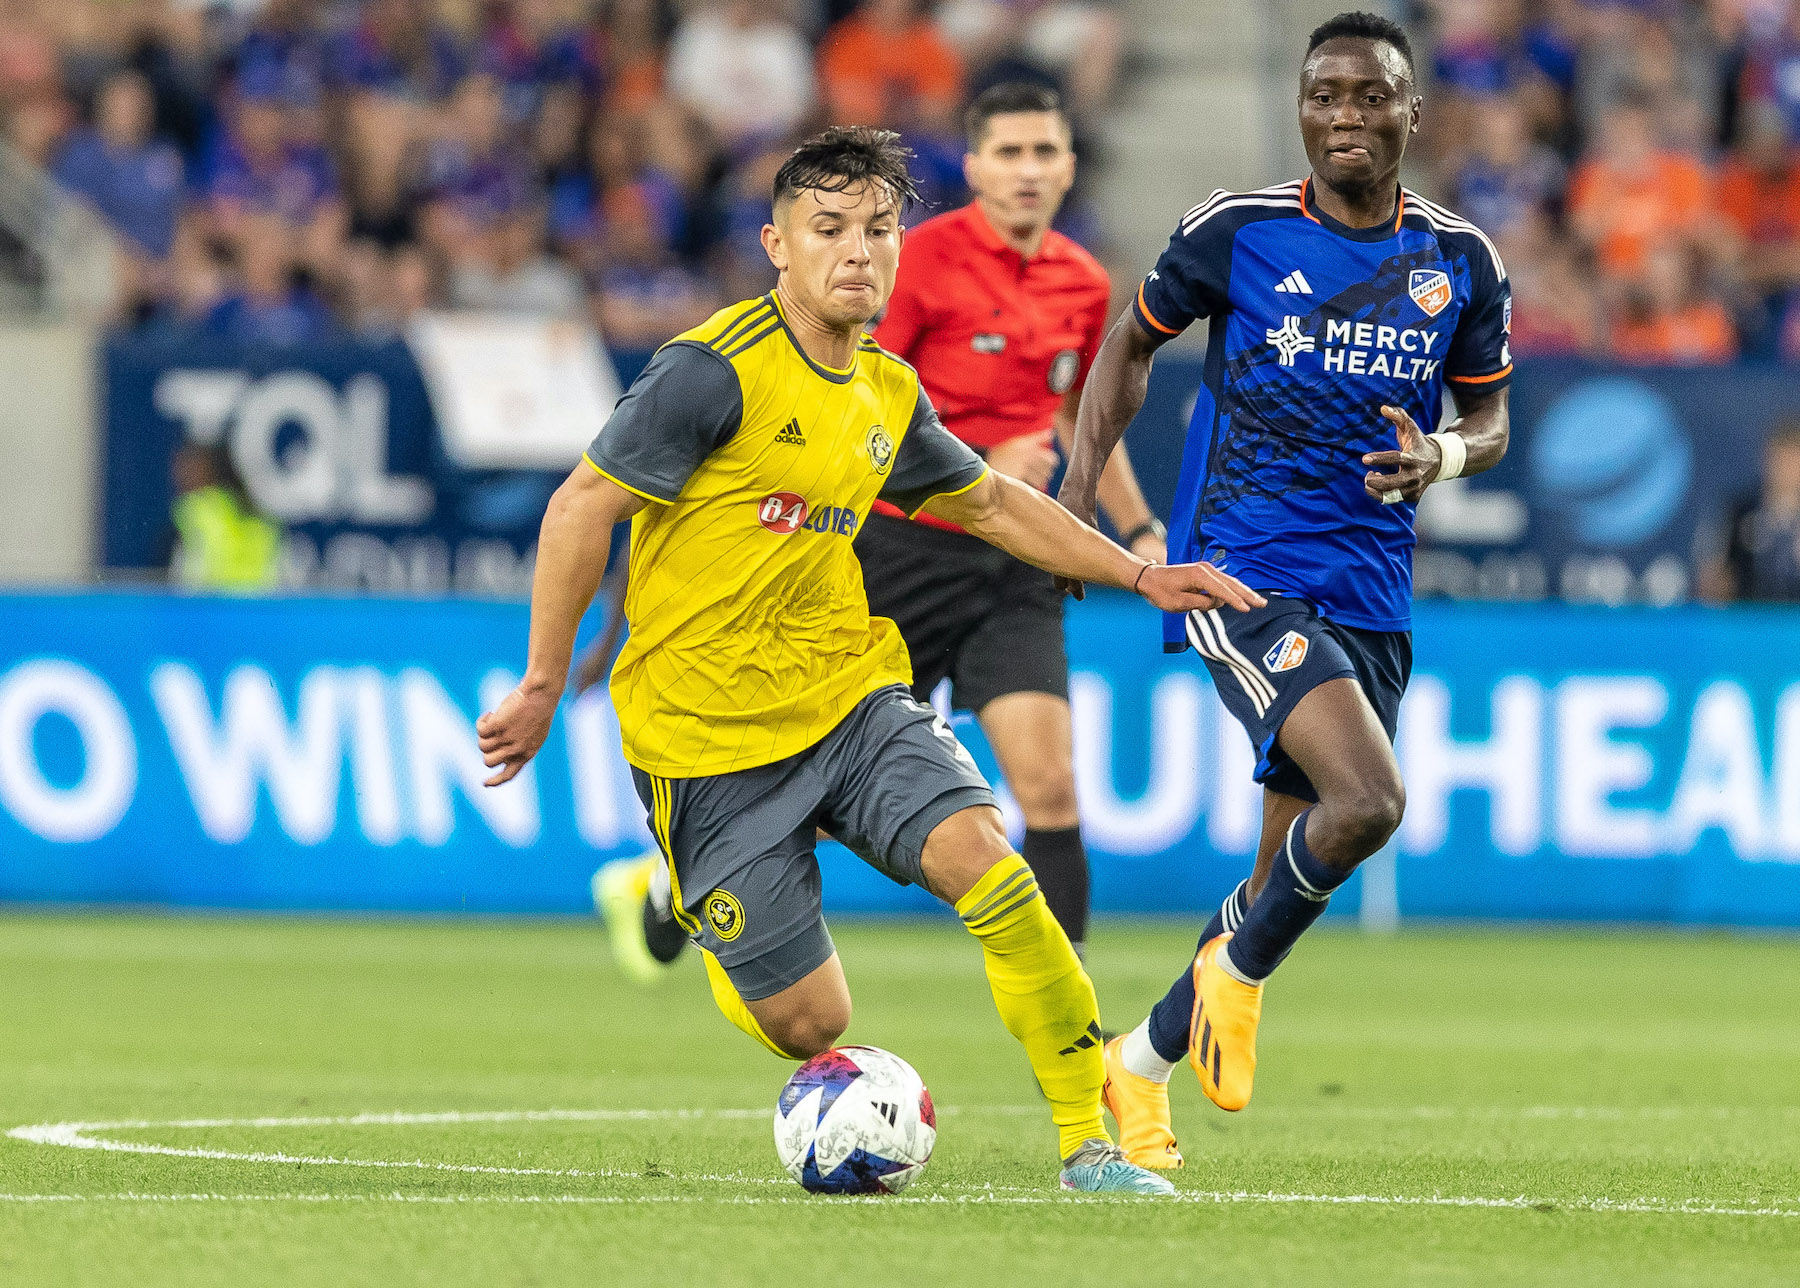 Danny Griffin carries the ball for the Riverhounds in their U.S. Open Cup quarterfinal at FC Cincinnati on June 6, 2023 at TQL Stadium in Cincinnati